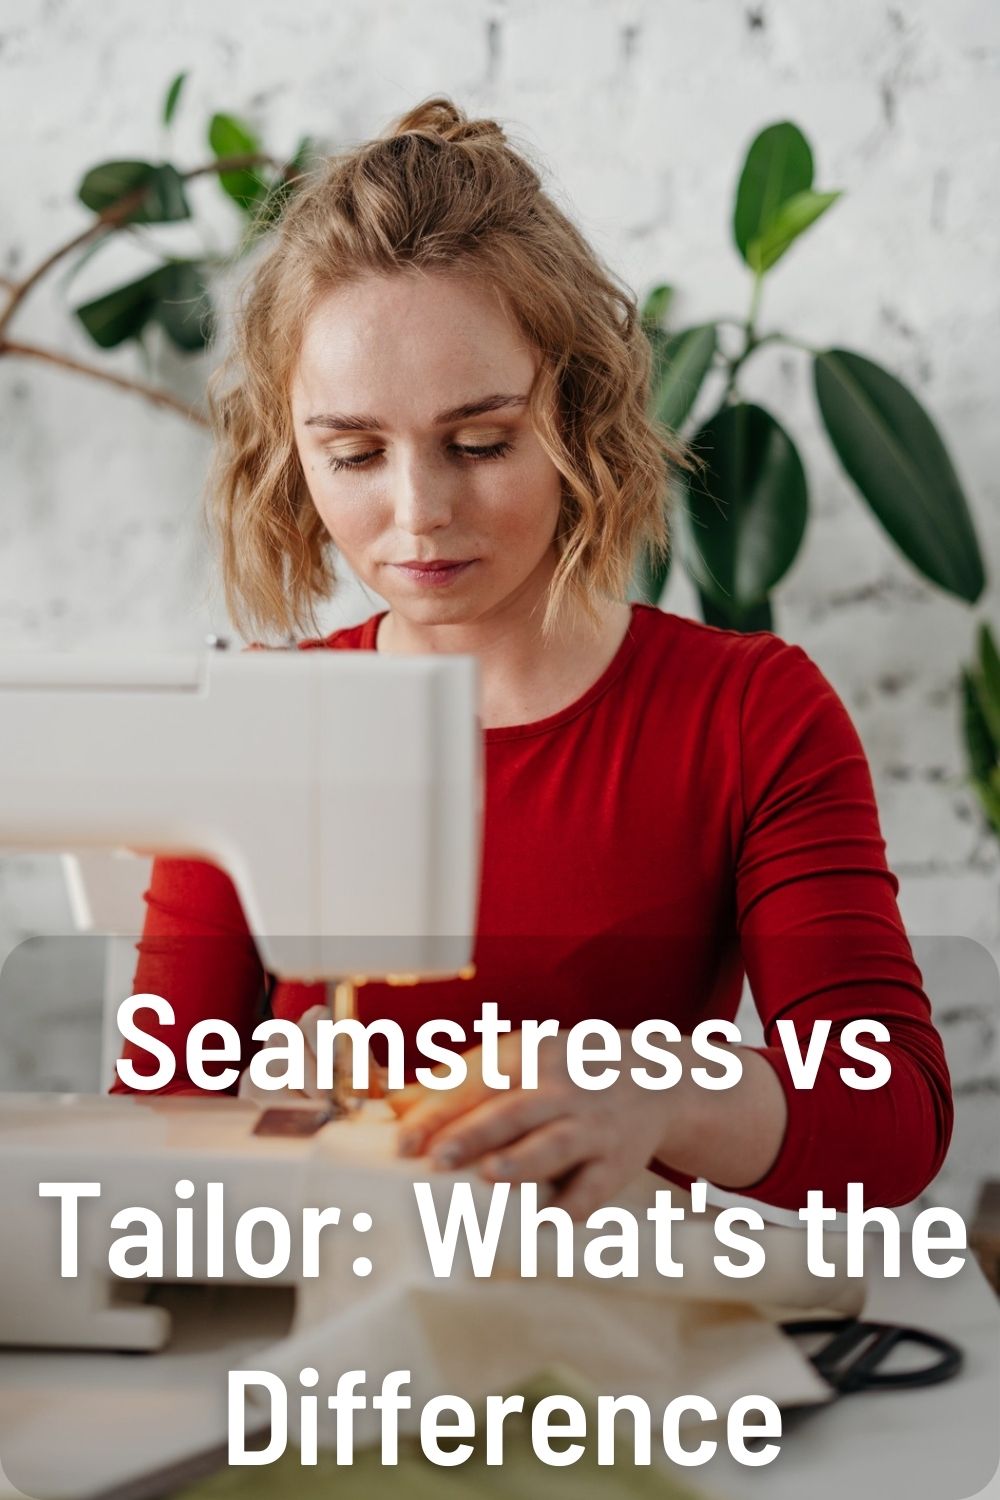 Seamstress vs Tailor What's the Difference